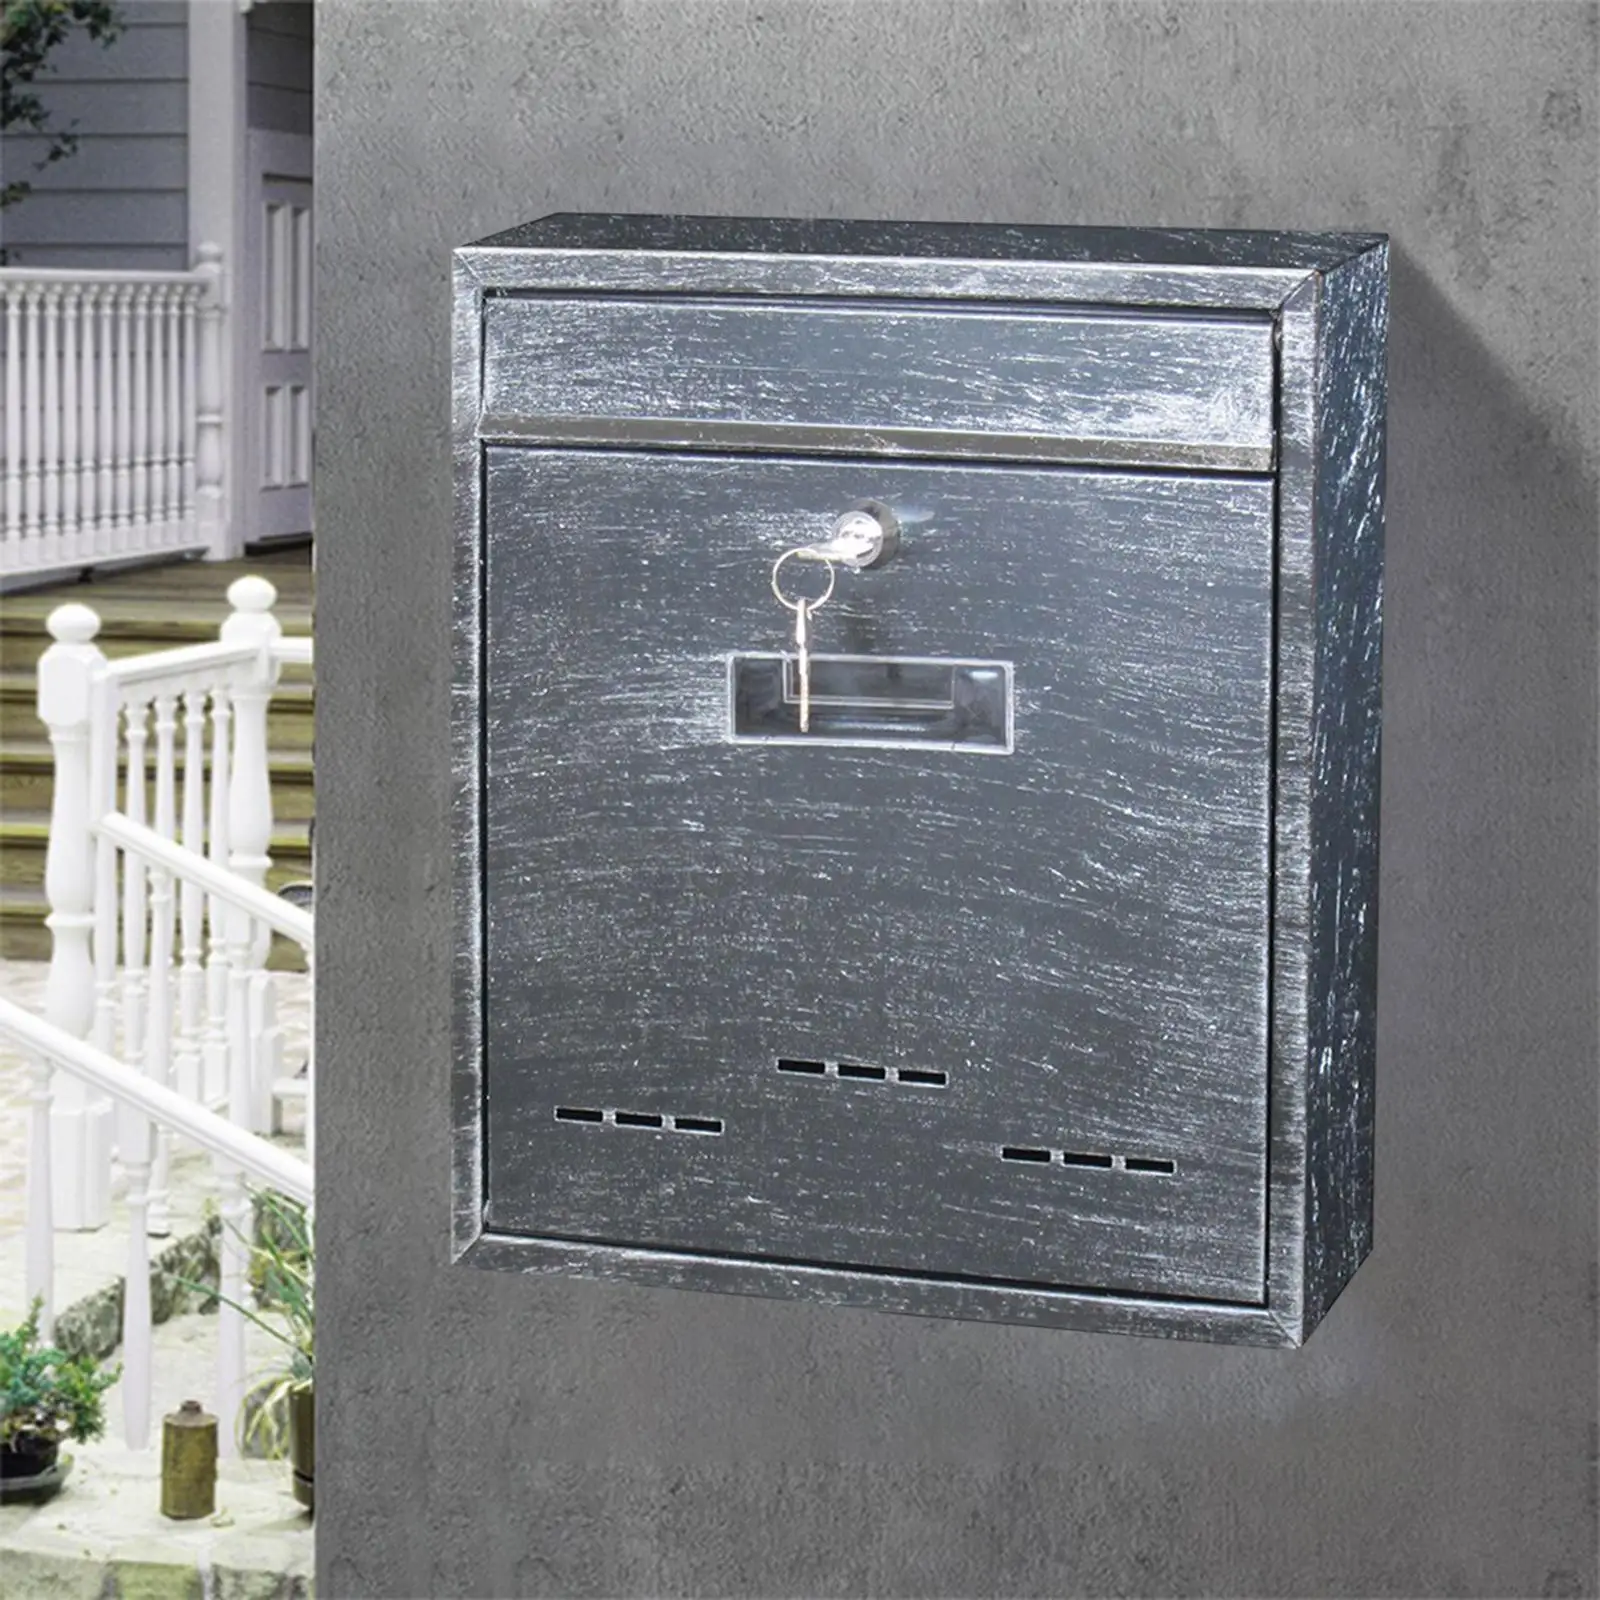 Retro Style Wall Mount Mailbox Lockable Iron Rainproof Mail Box Letter Box Postbox for Gate External door Office